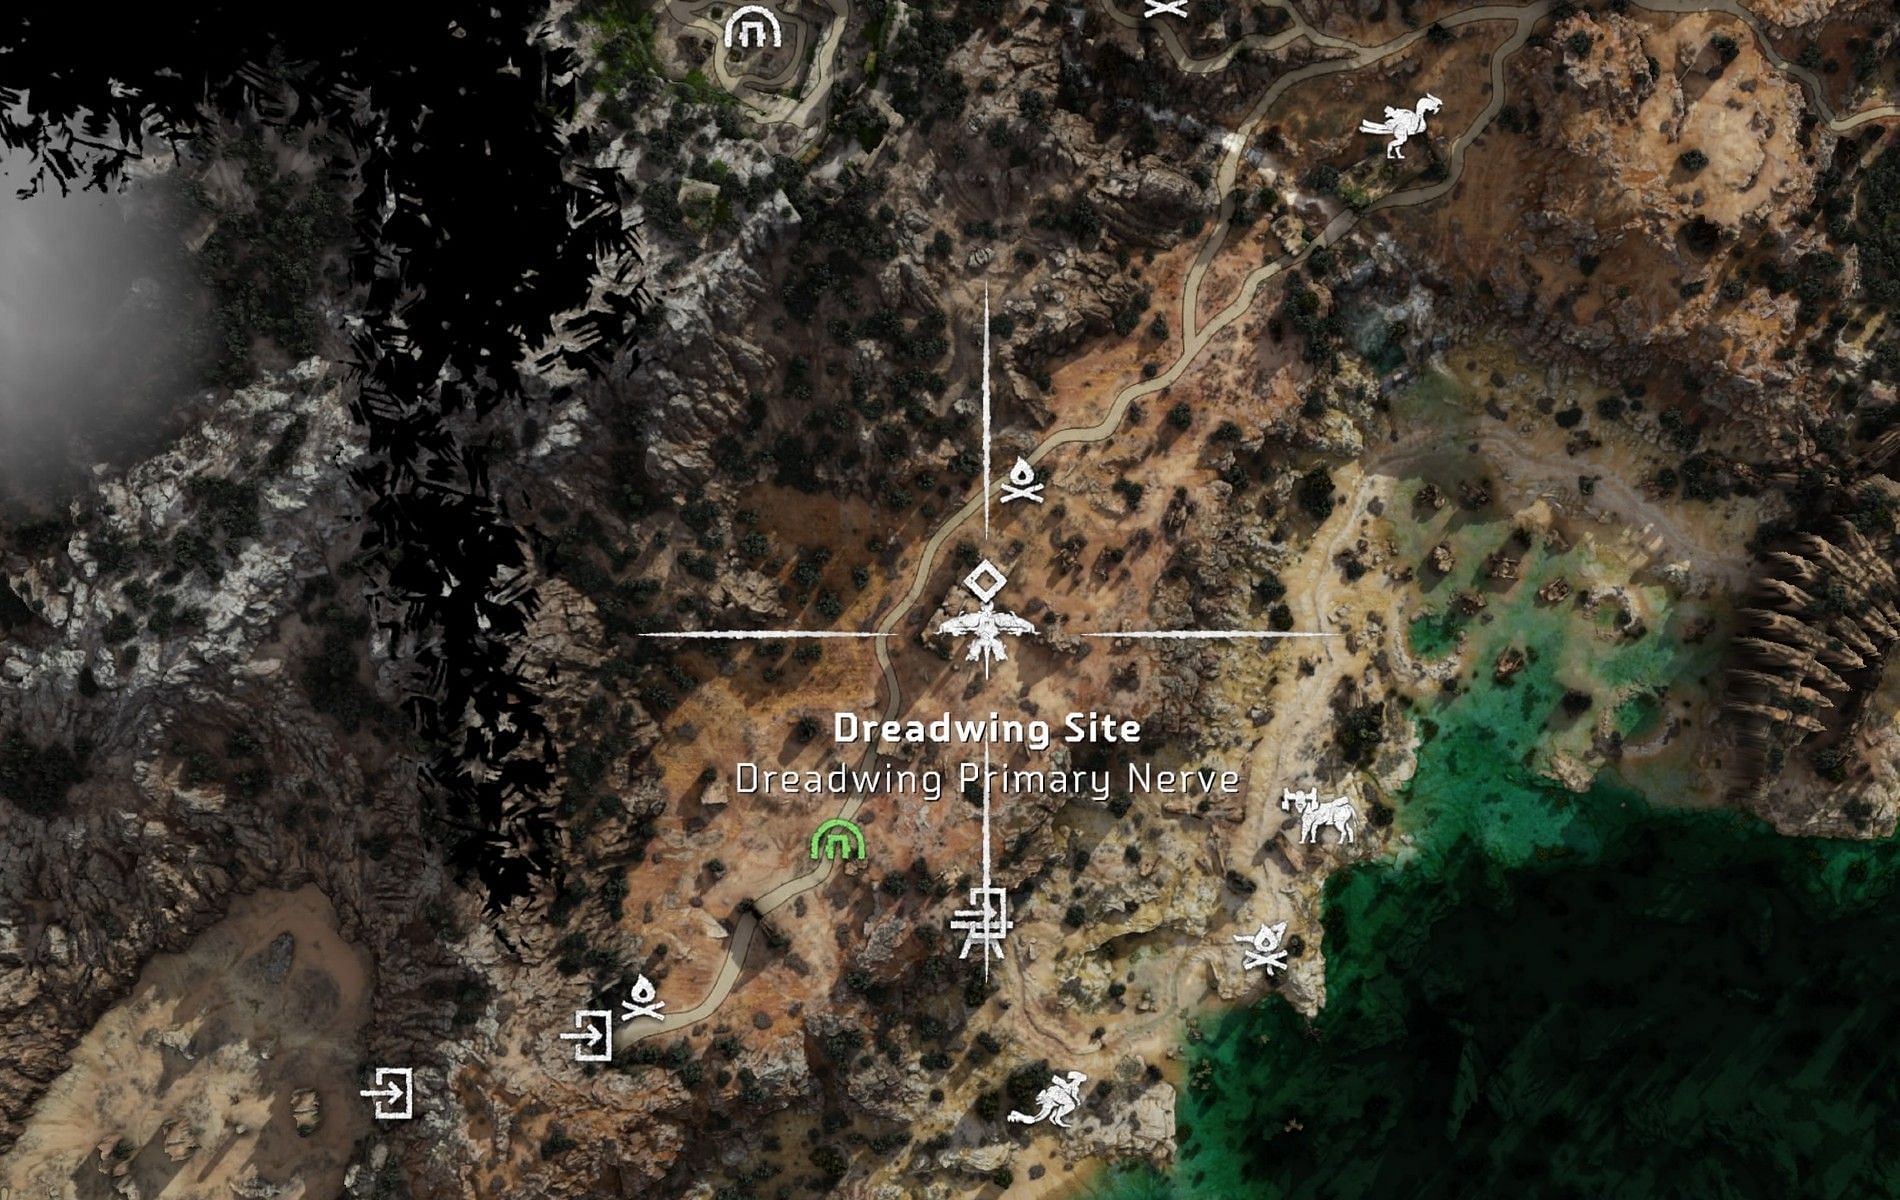 horizon-forbidden-west-dreadwing-locations-and-weaknesses